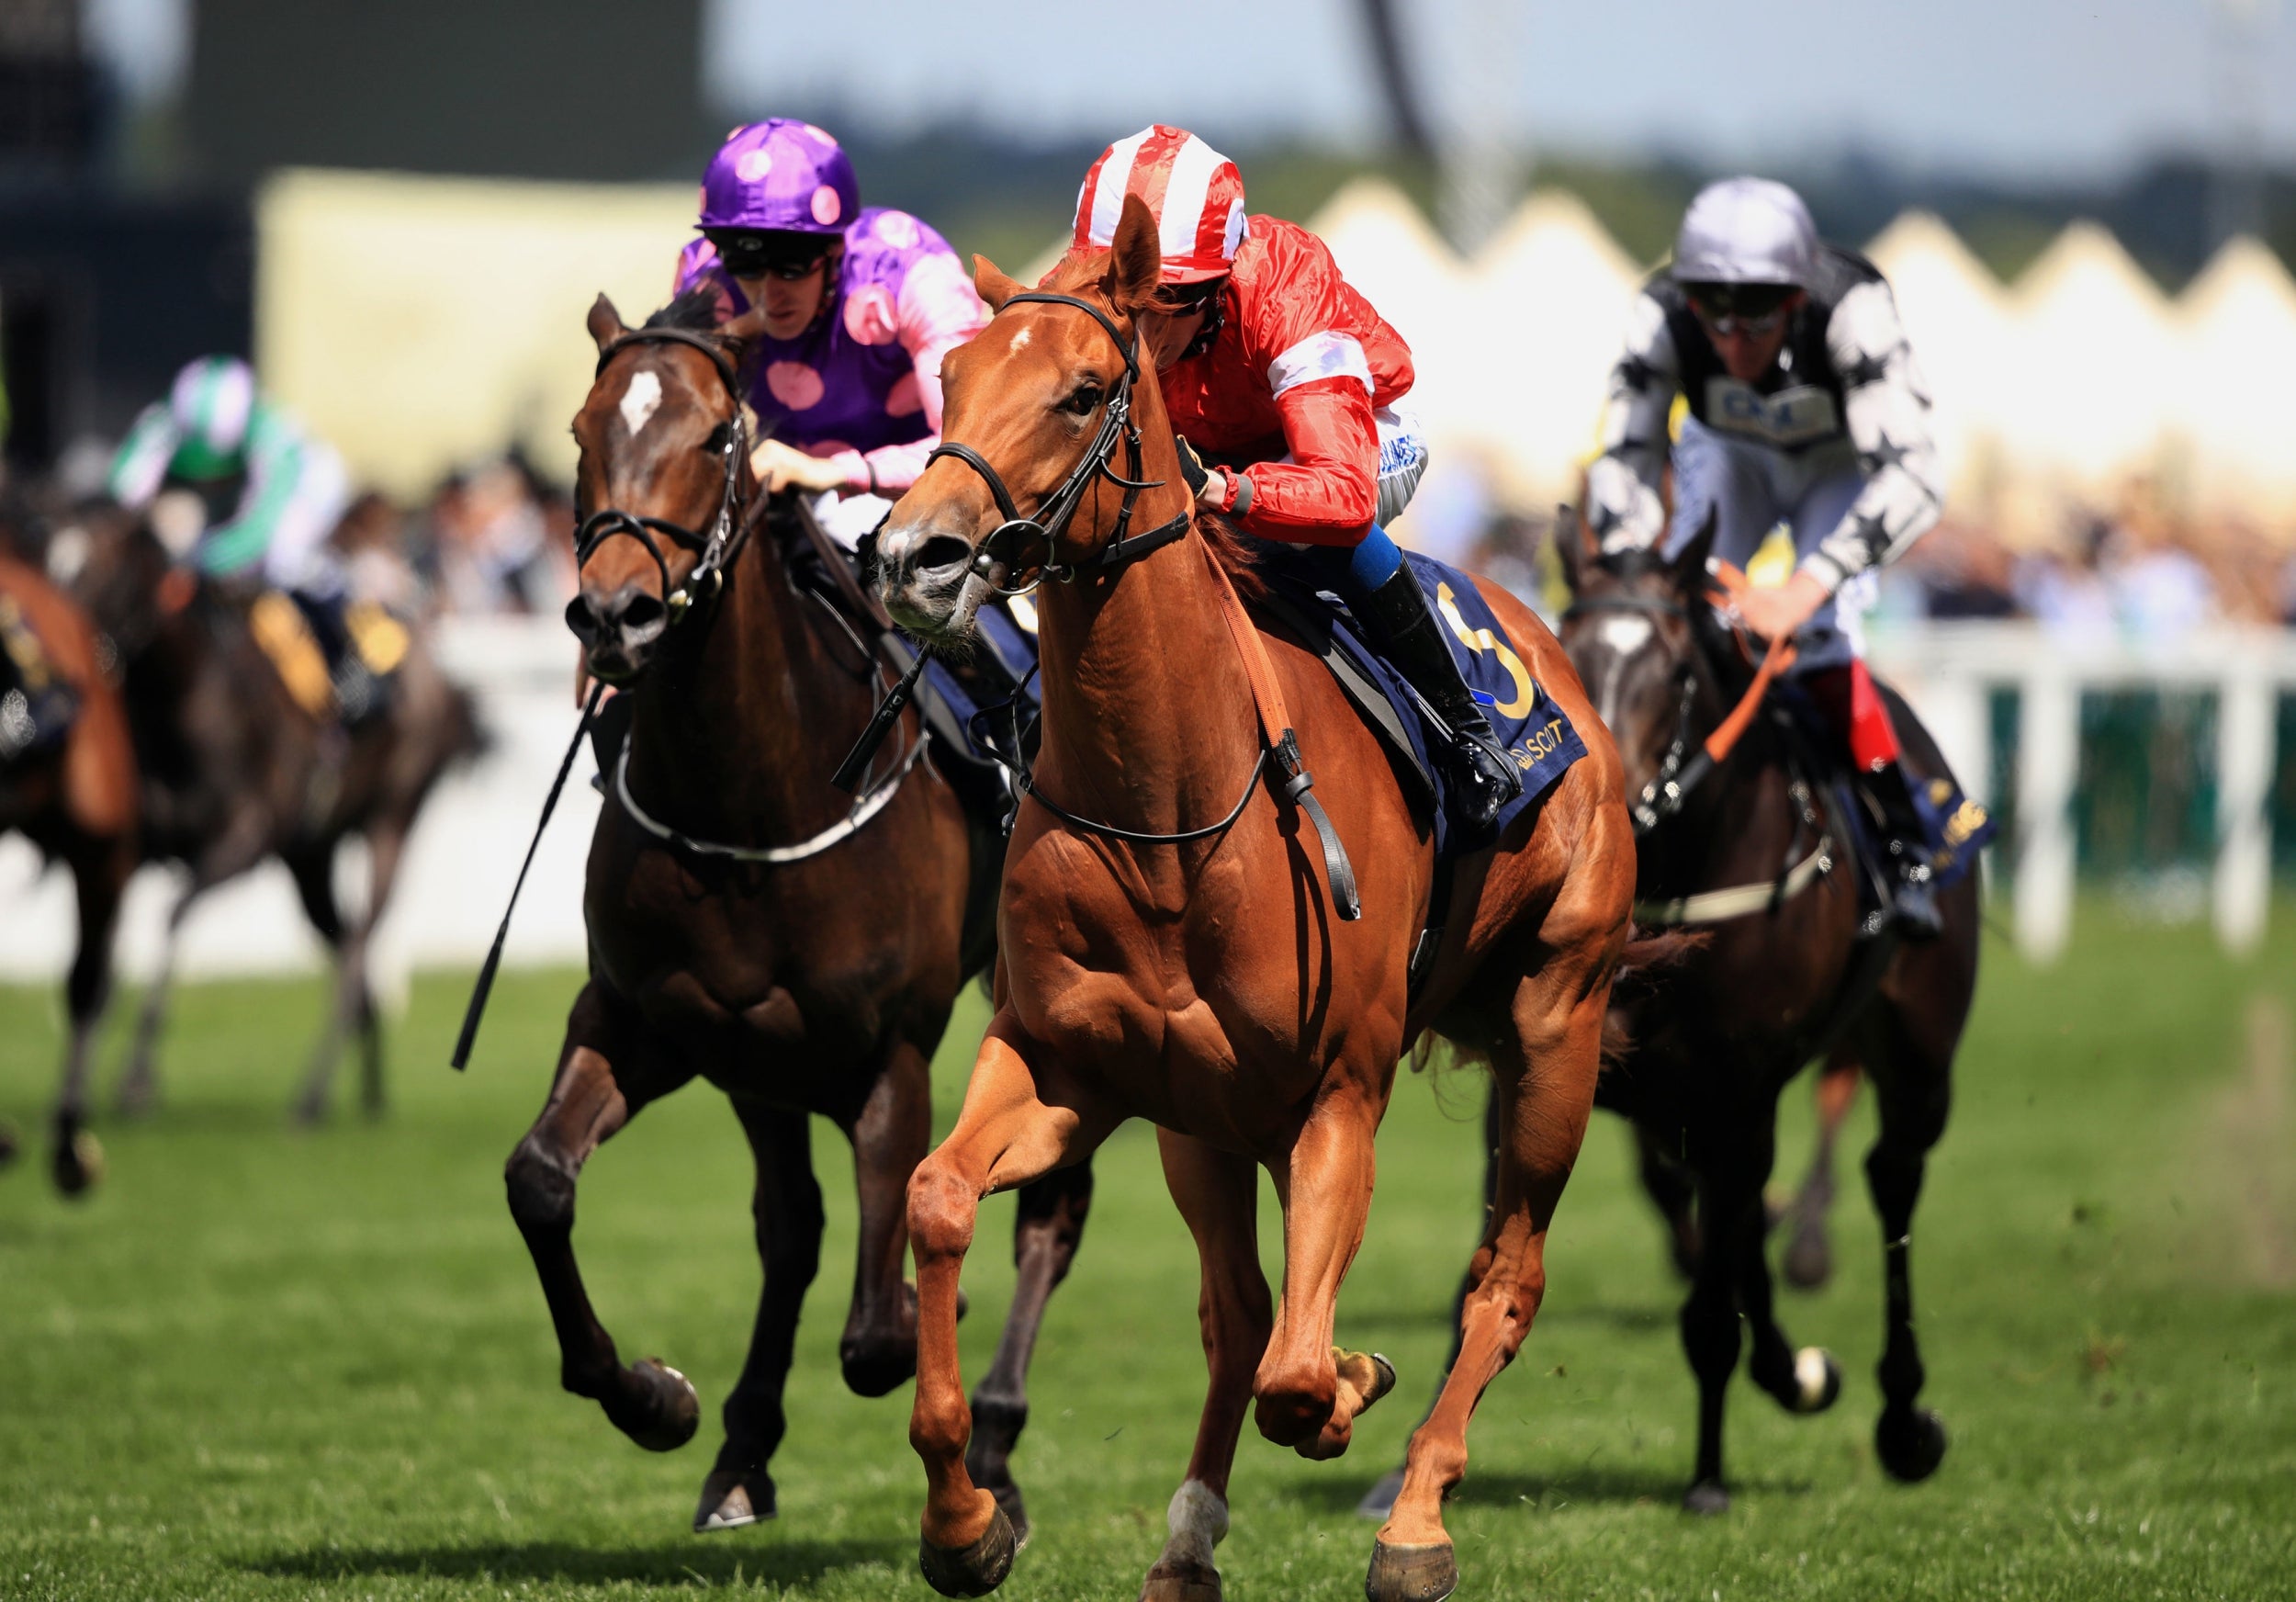 Top the biggest horse races in the world